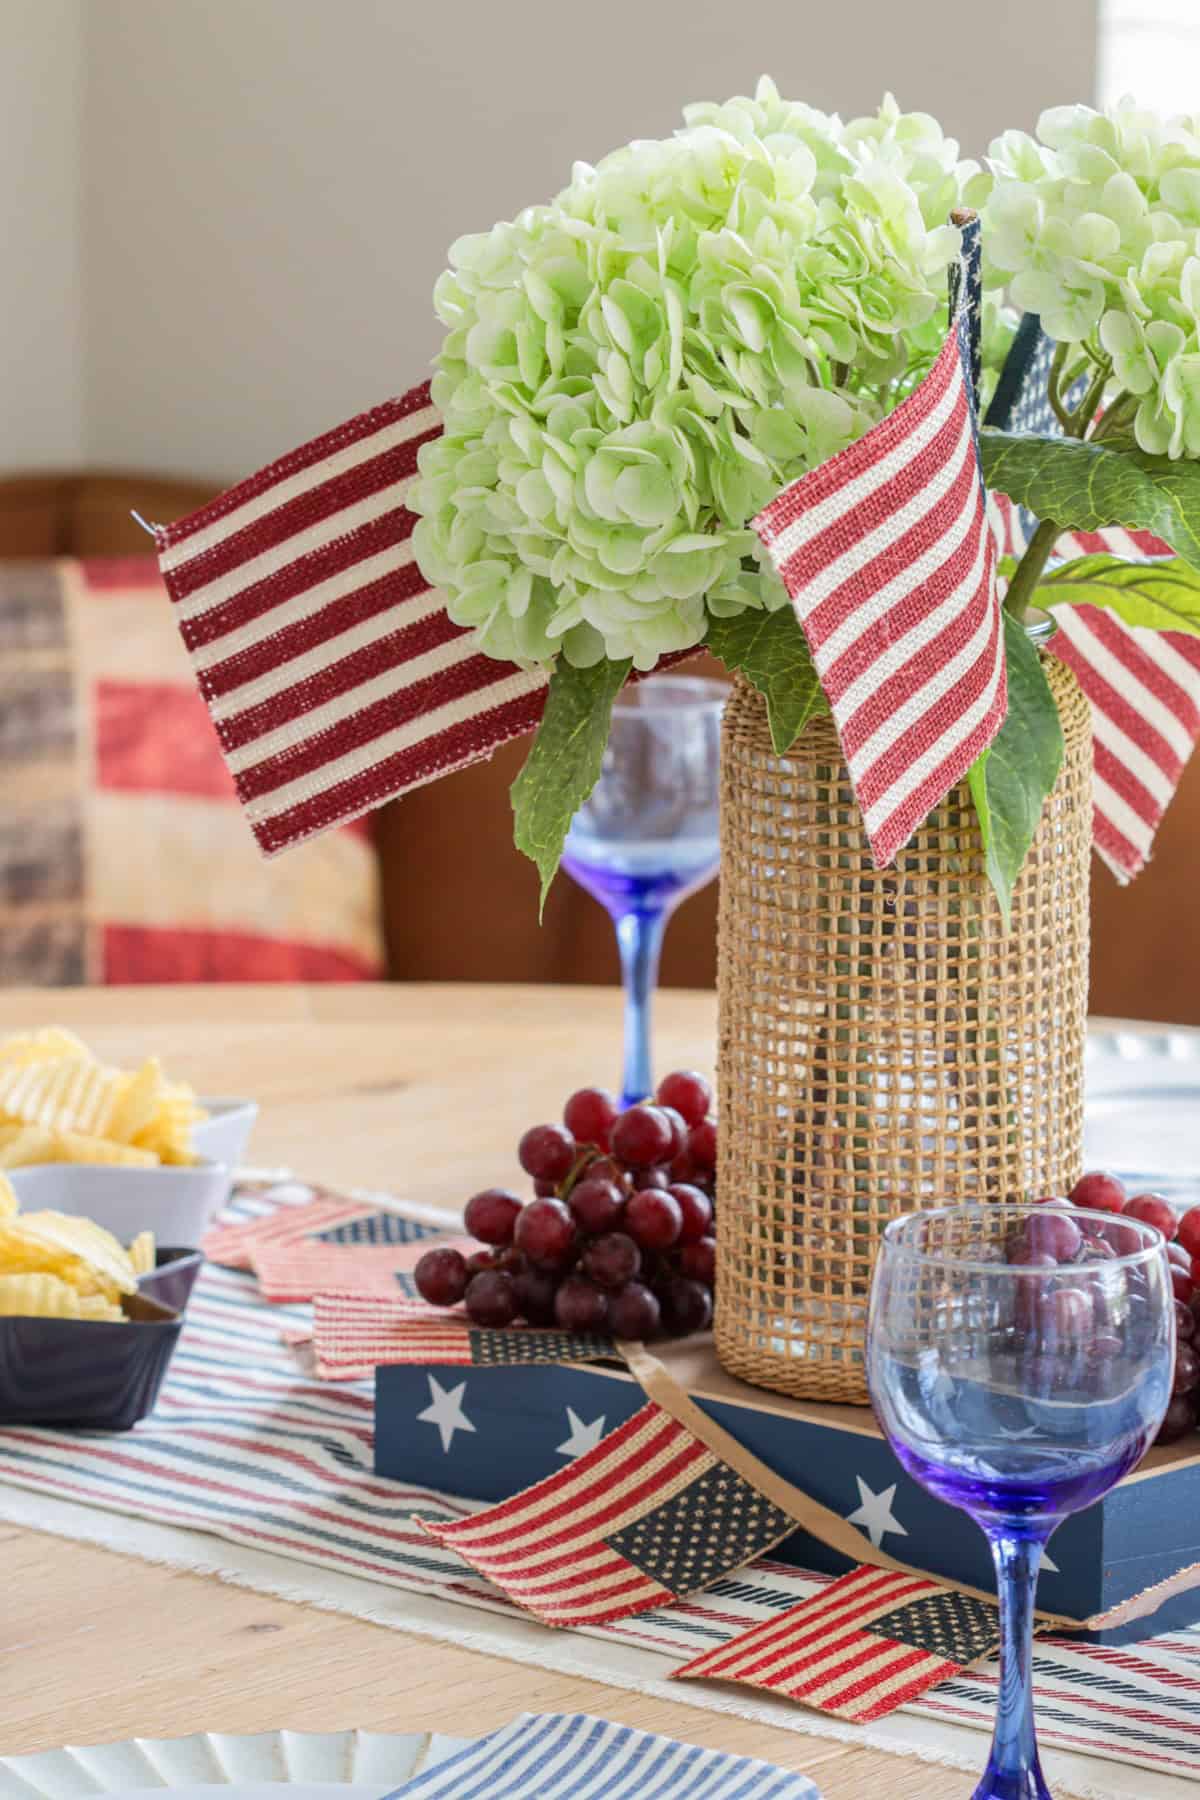 Hydrangea centerpiece with American flags on table.